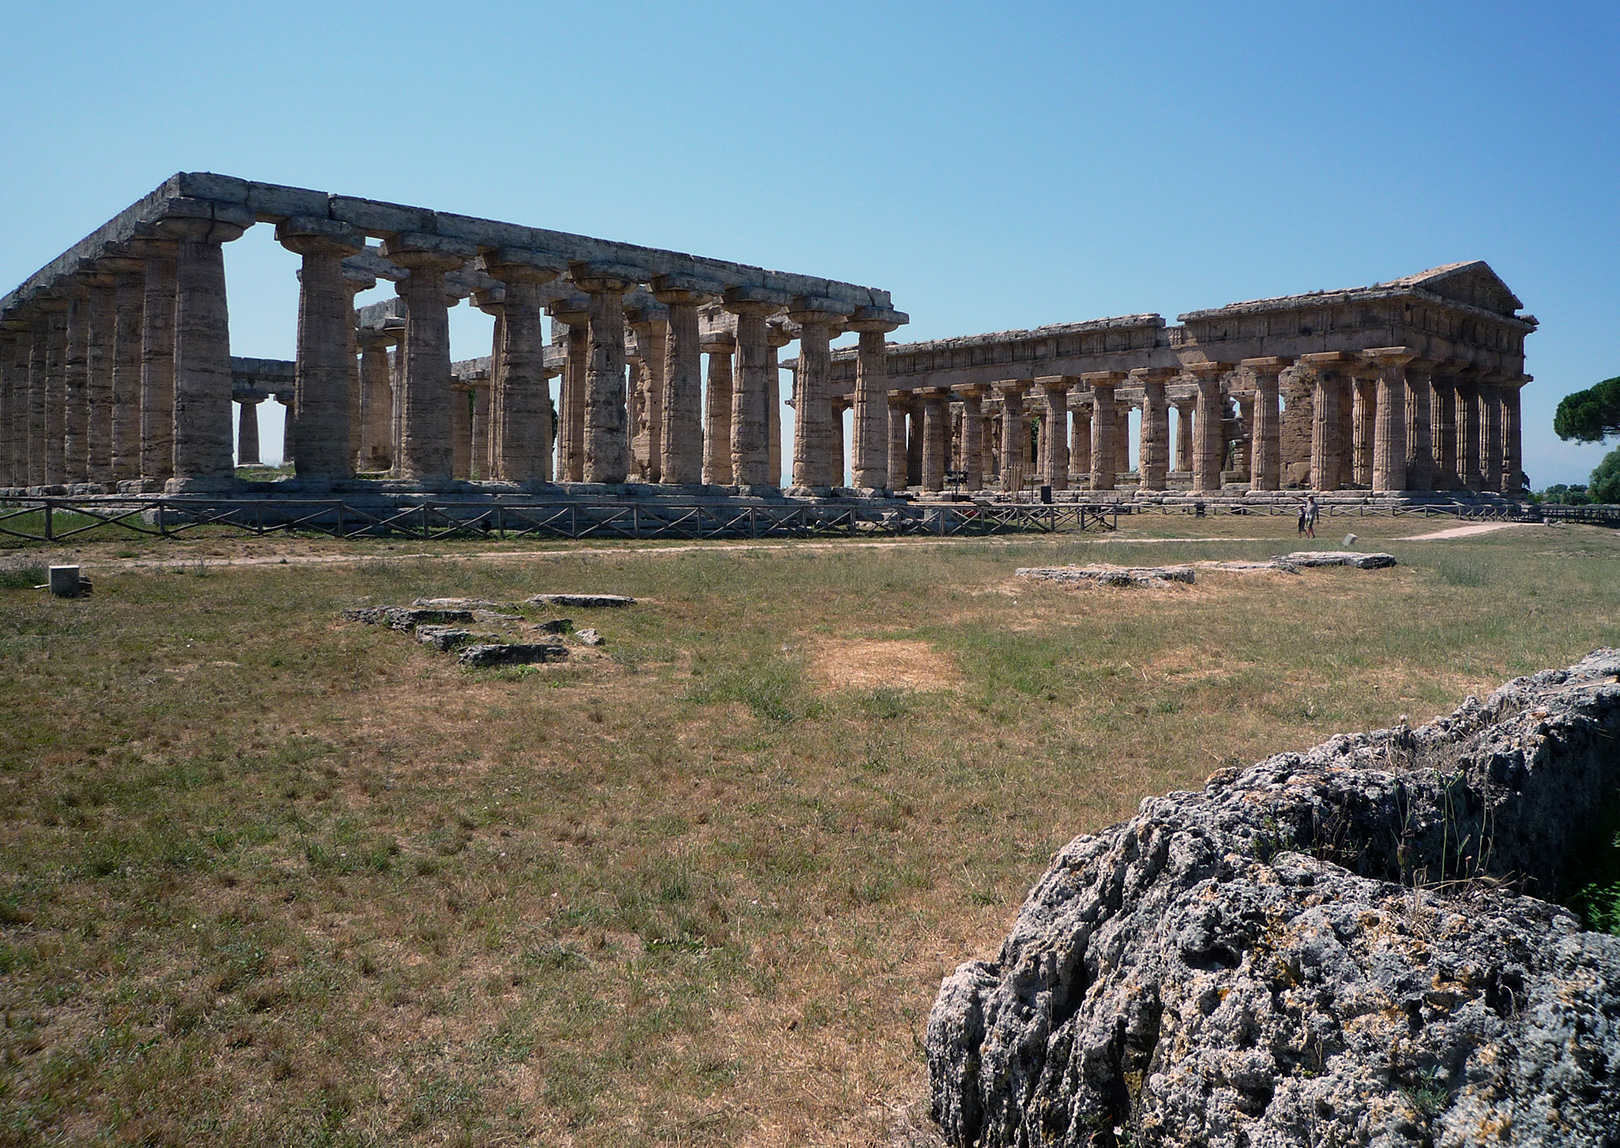 Hera I ("The Basilica") and "Hera II Behind. Hera I ("The Basilica"), c.560-530 B.C.E., 24.35 x 54 m, Greek, Doric temple from the archaic period likely dedicated to Hera, employs a 9:18 column ratio, Paestum (Latin) previously Poseidonia (Greek); and "Hera II," c. 460 B.C.E., 24.26 x 59.98 m, Greek, Doric temple from the classical period likely dedicated to Hera (not Poseidon), employs an 6:14 column ratio, Paestum (Latin) previously Poseidonia (Greek)